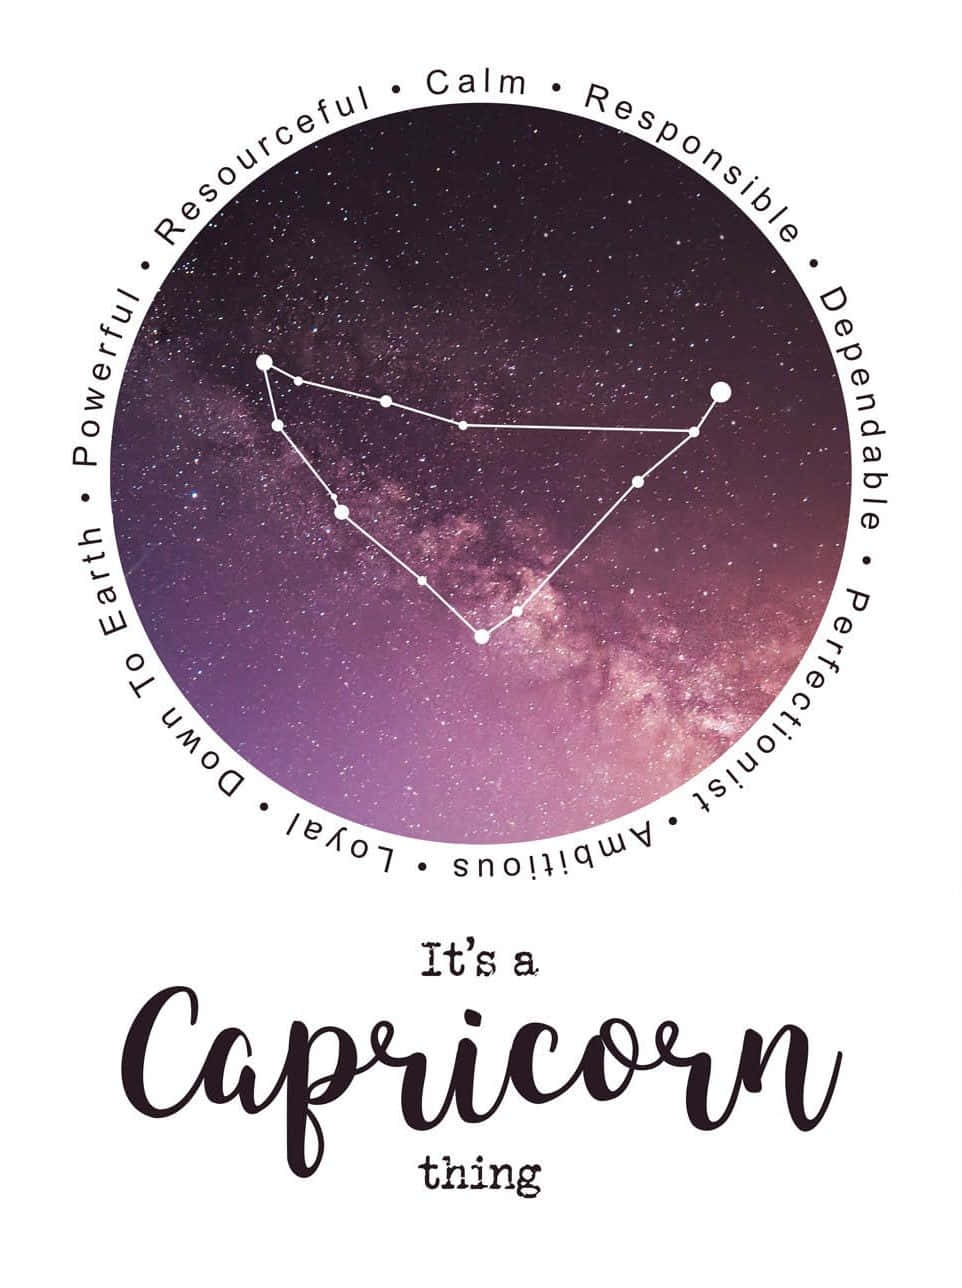 This is a capricorn thing - Capricorn